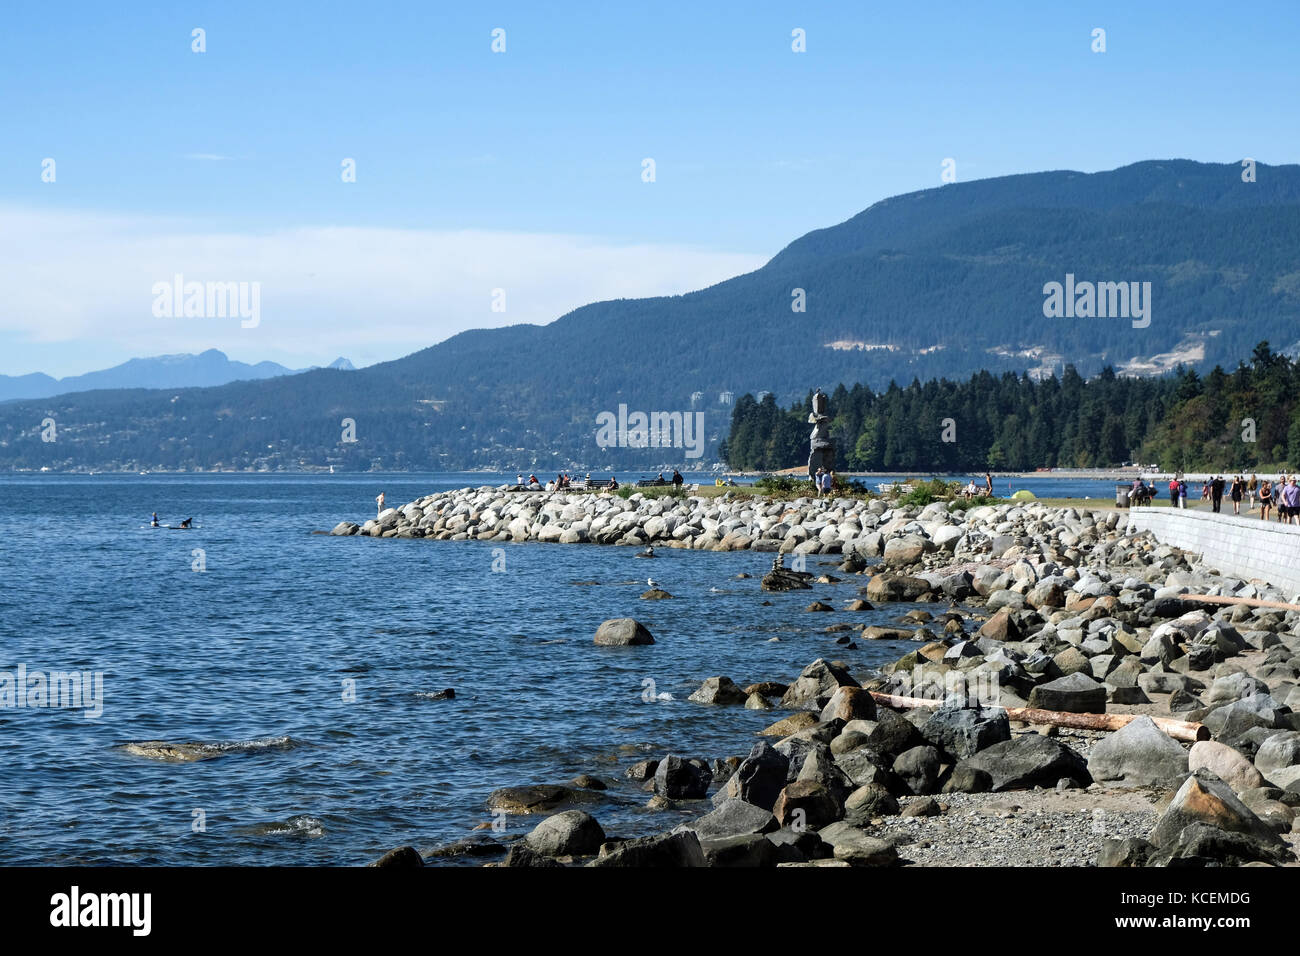 Inukshuk, a human-made stone sculpture which is an ancient symbol of the Inuit culture. The sculpture sits along the  seawall trail in Vancouver, Brit Stock Photo